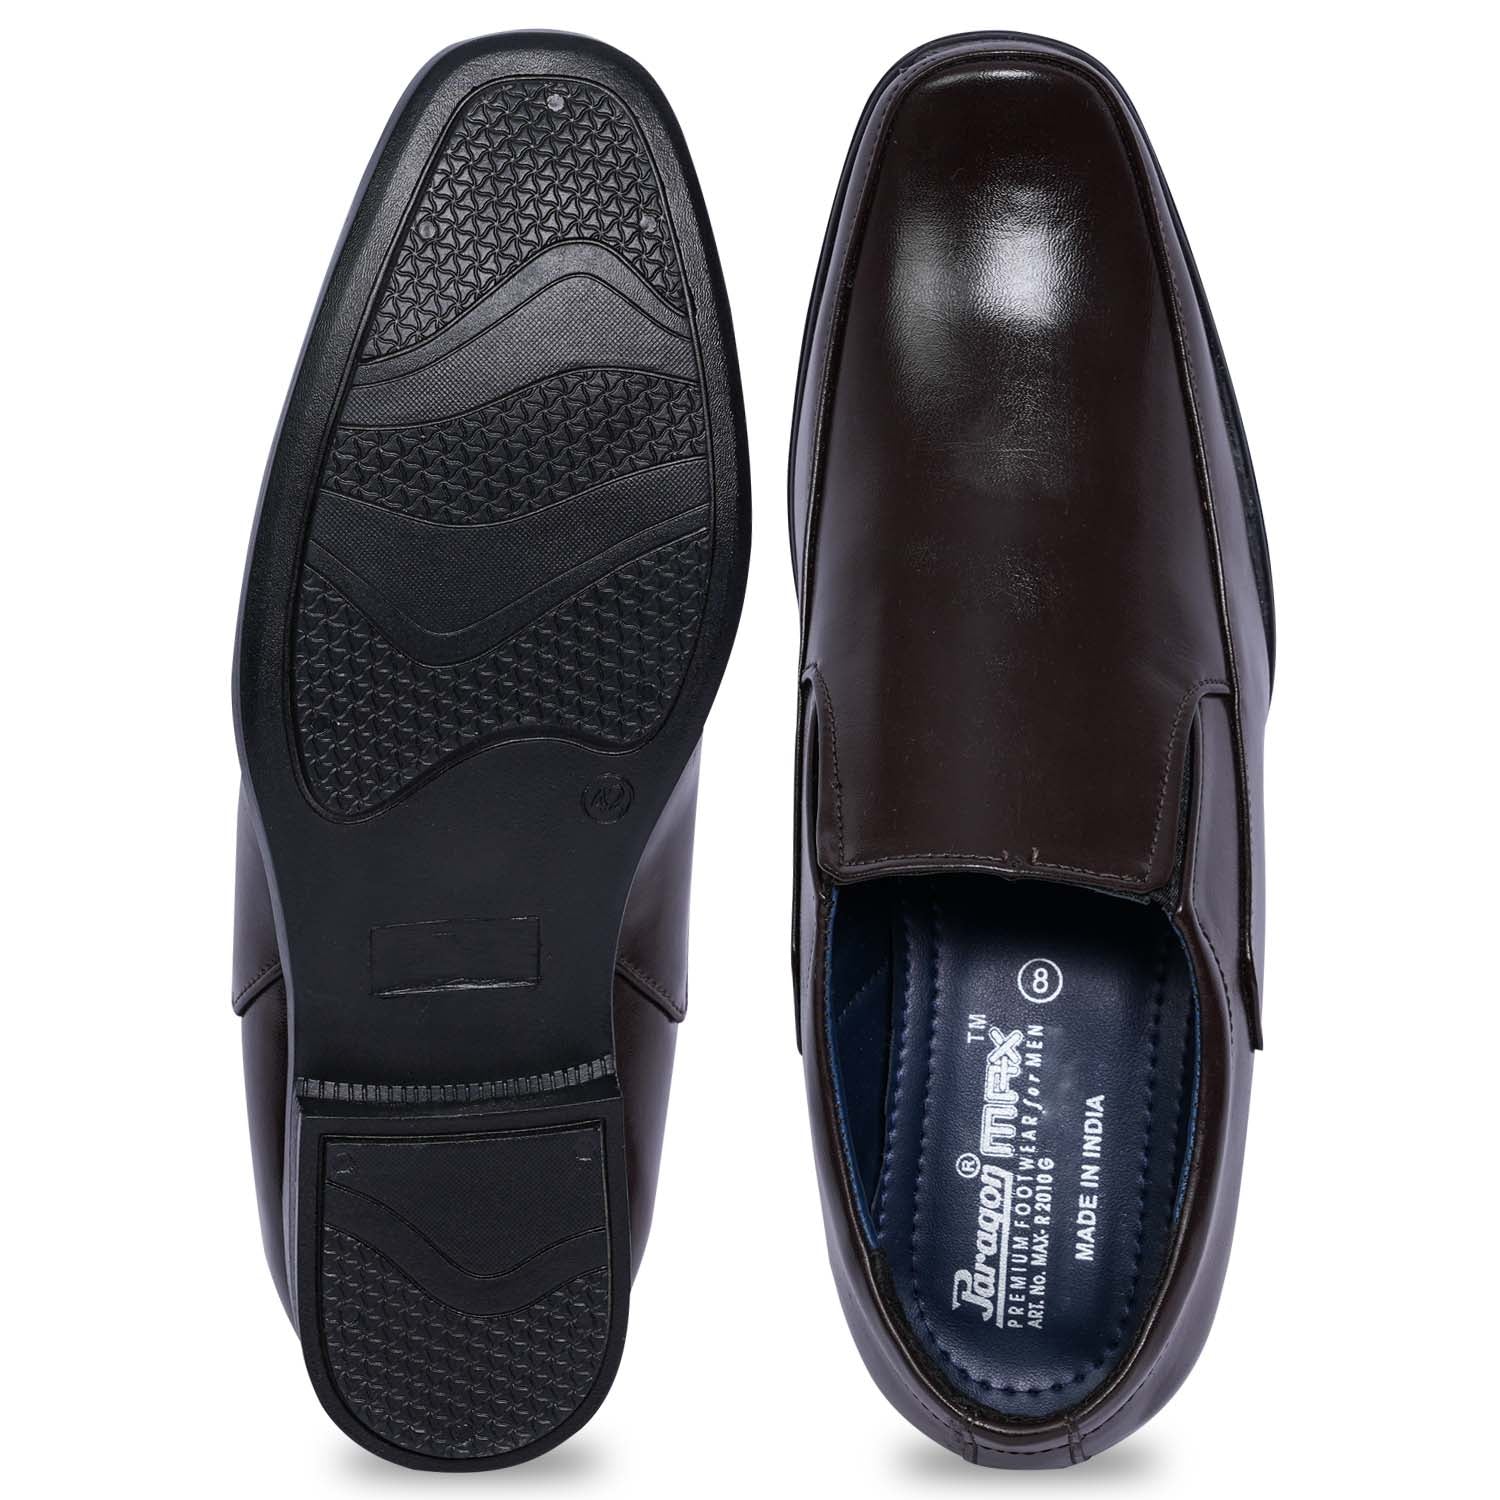 Paragon R2010G Men Formal Shoes | Corporate Office Shoes | Smart &amp; Sleek Design | Comfortable Sole with Cushioning | Daily &amp; Occasion Wear